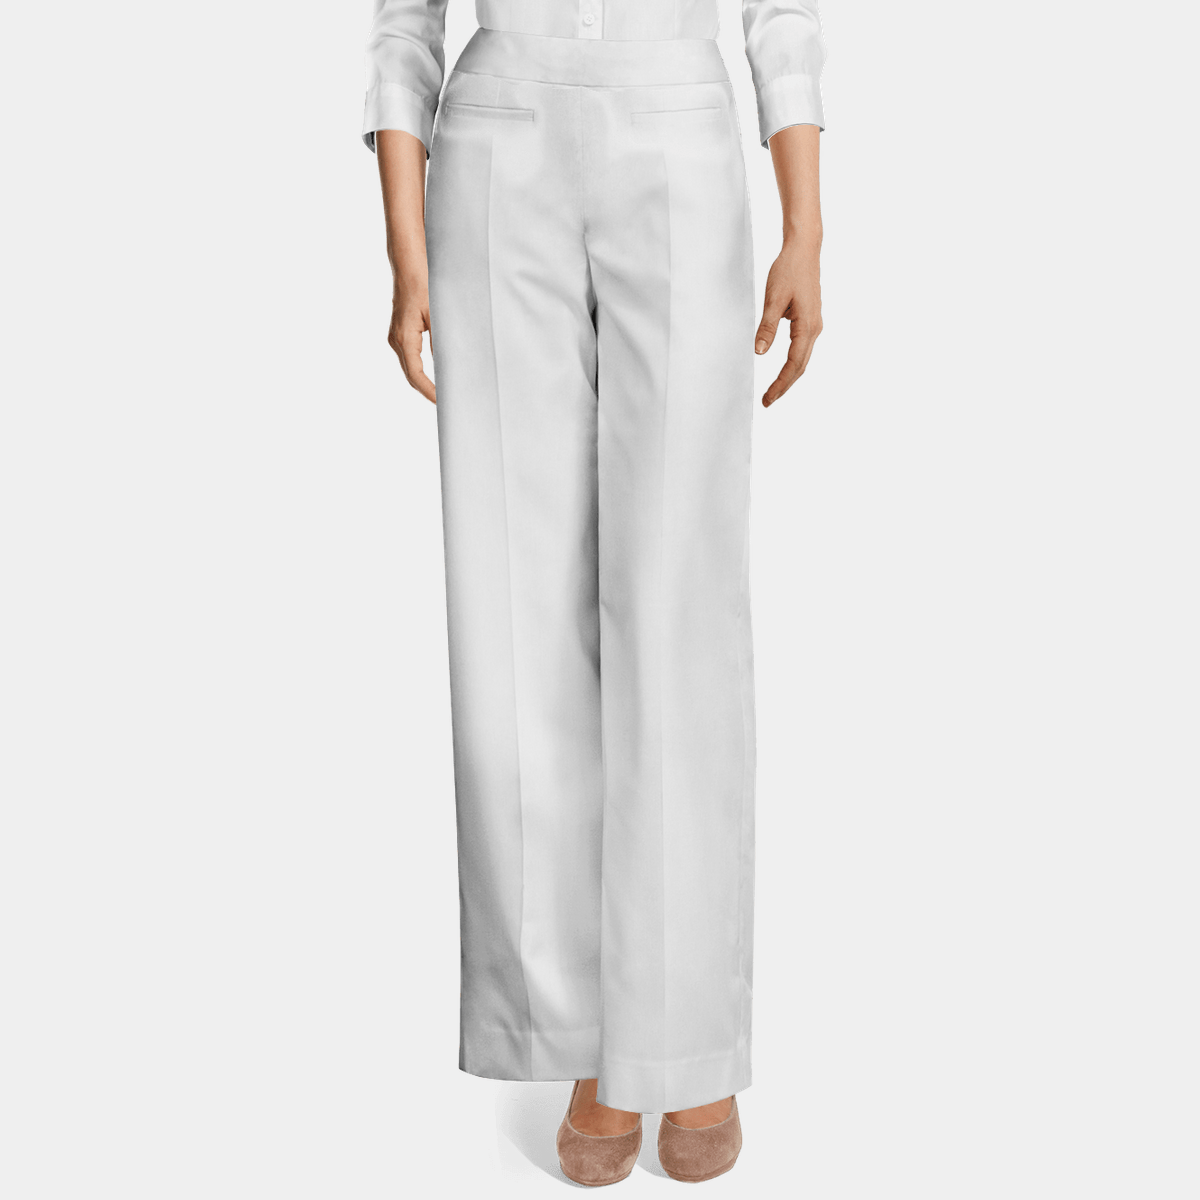 Stonewashed Linen Women Pants - pure 100% linen flax white pre-washed  laundered Europe European linen lint free relaxed cut straight legs  drawstring flat front side slip pockets – L i n e n C a s a